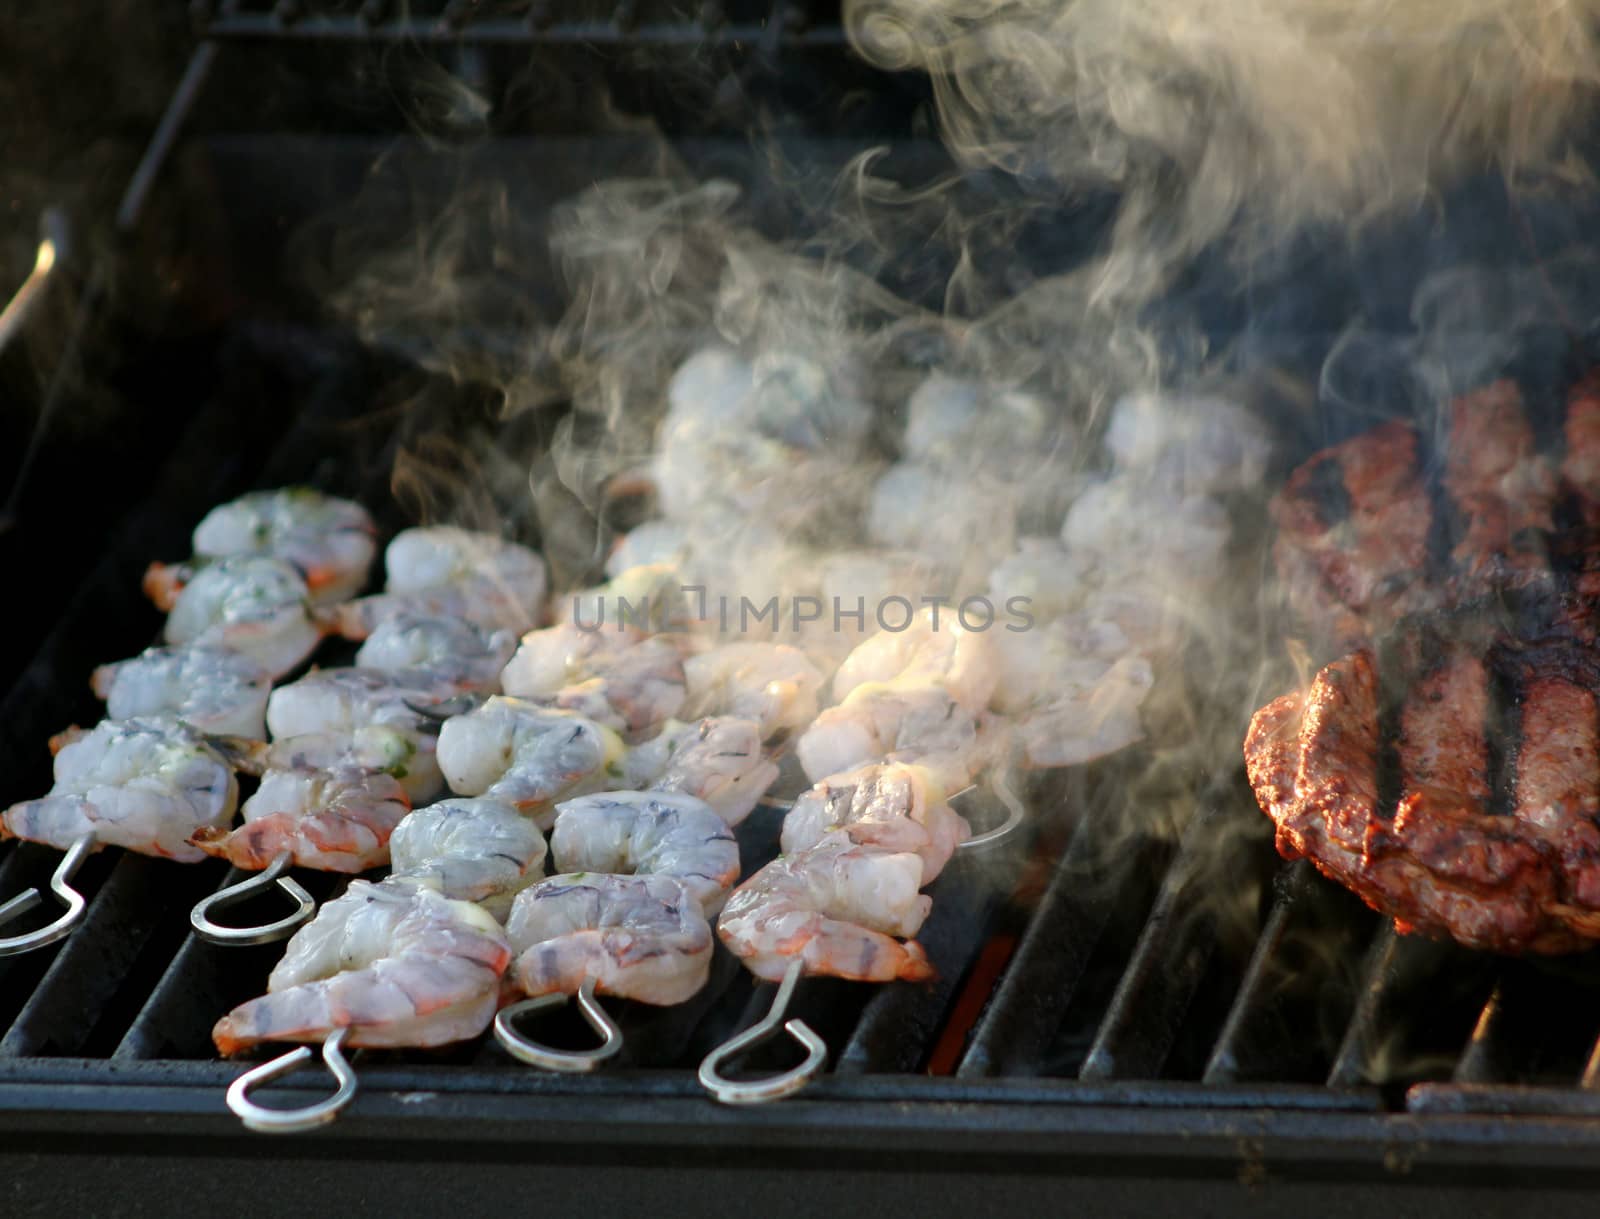 Skewered shrimp cooking (and smoking) on a barbecue grill along side beef